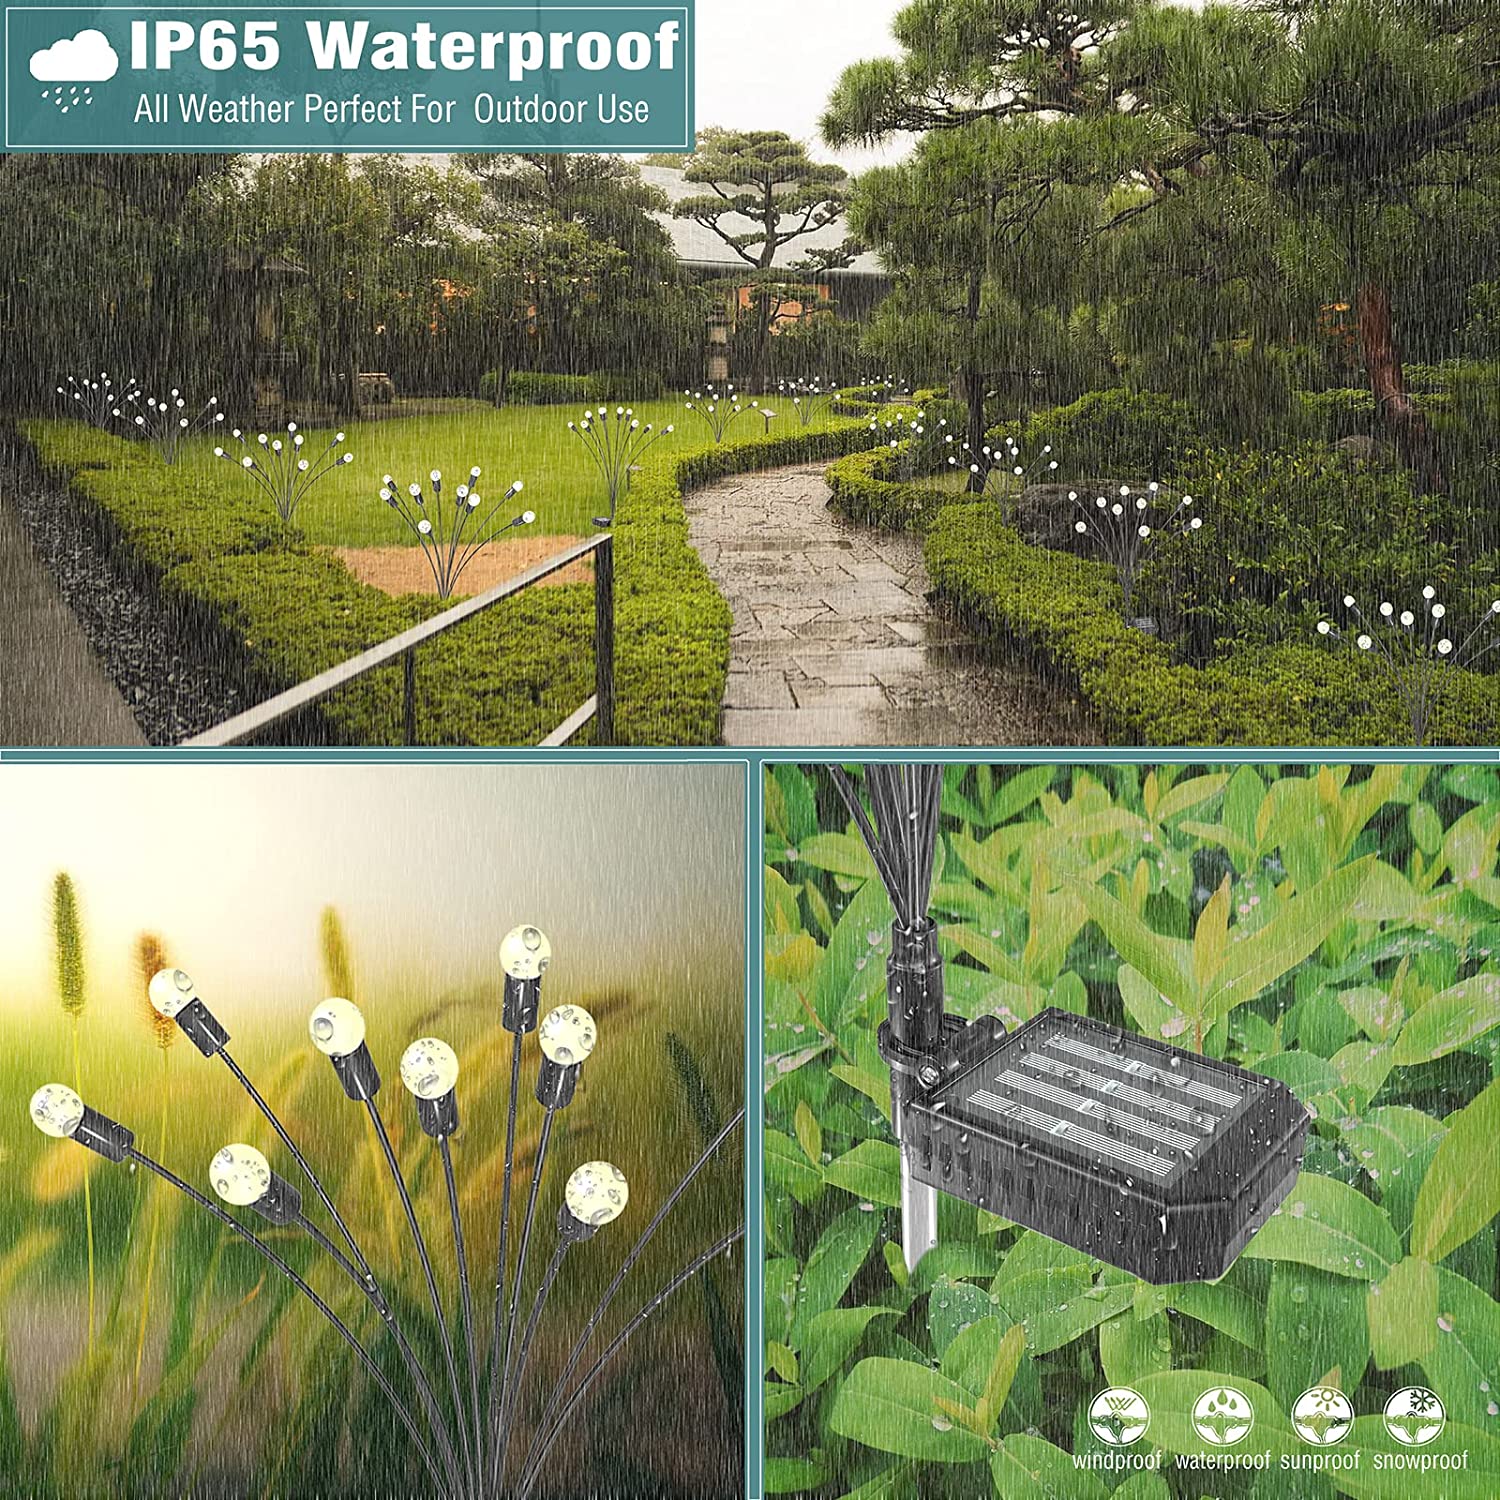 IP6S Waterproofl AIl Weather Perfect For Outdoor Use wind